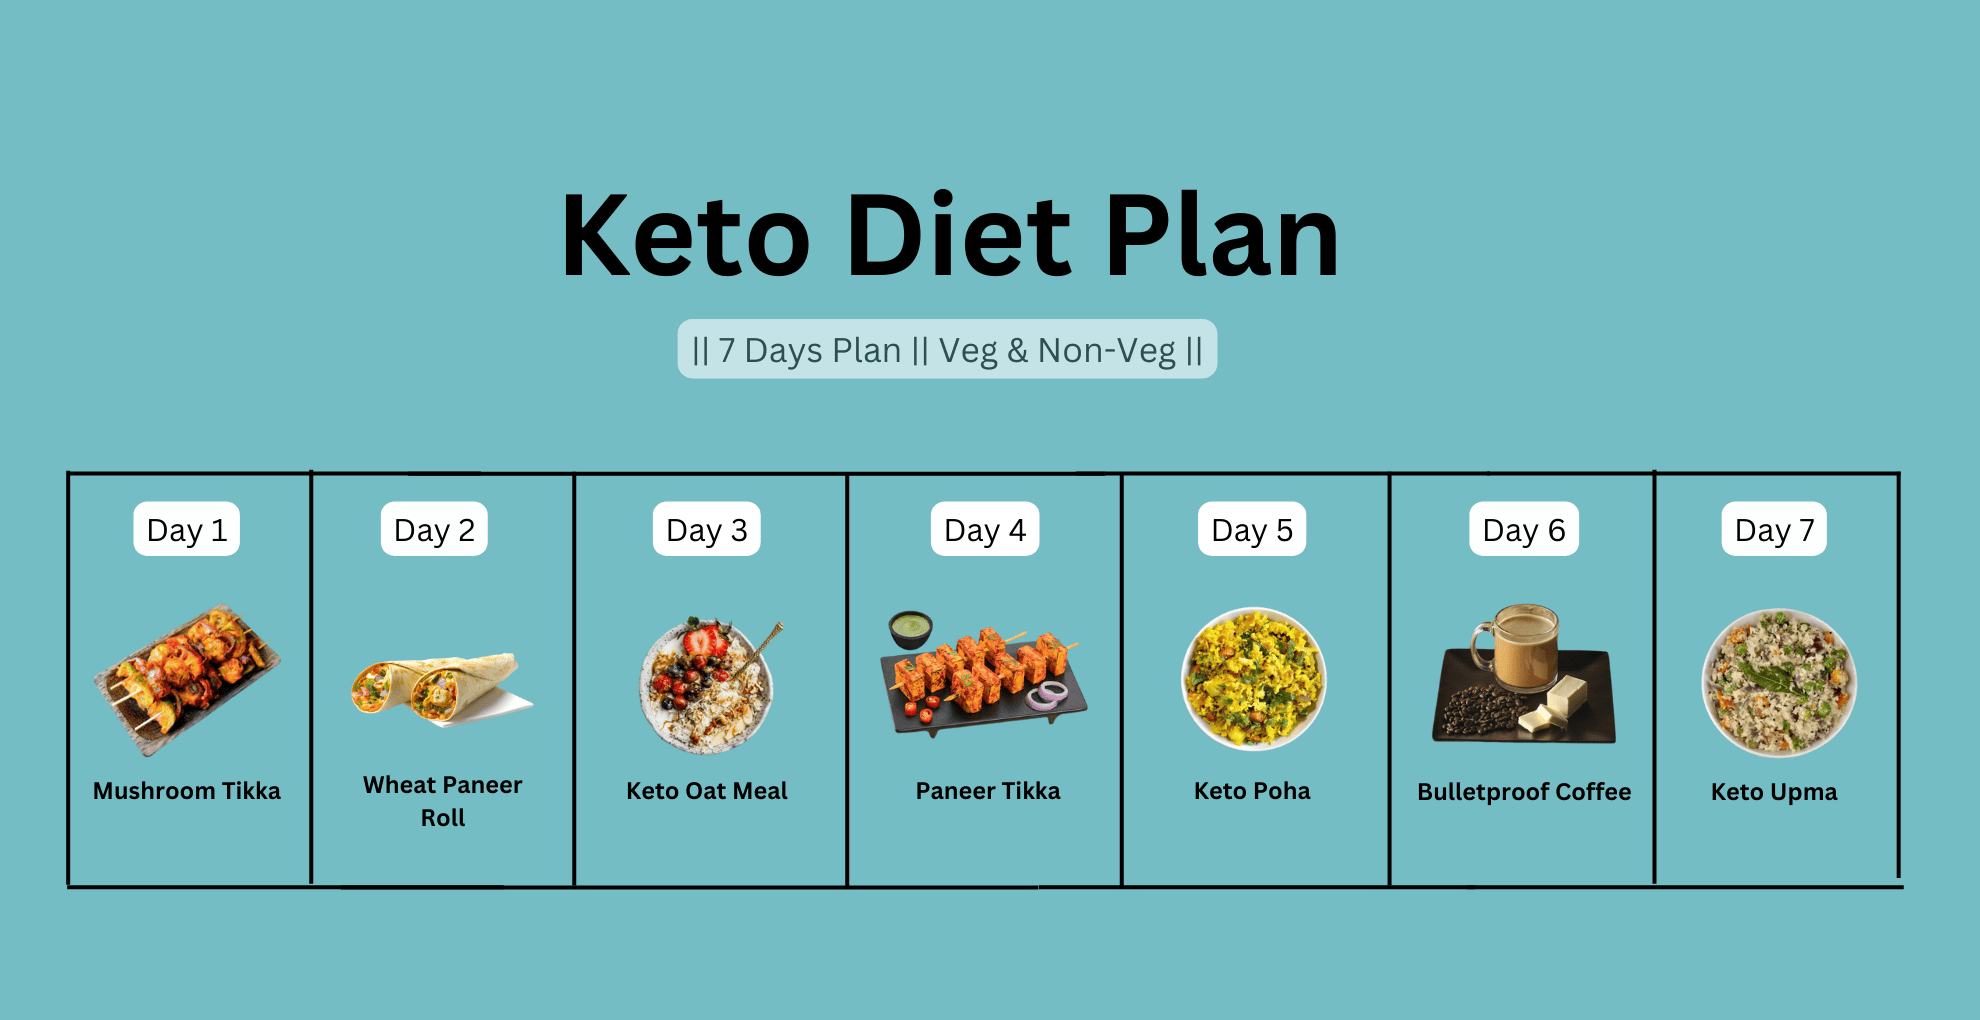 Keto Diet Plan: 7 Days Menu with Foods to Eat & Avoid